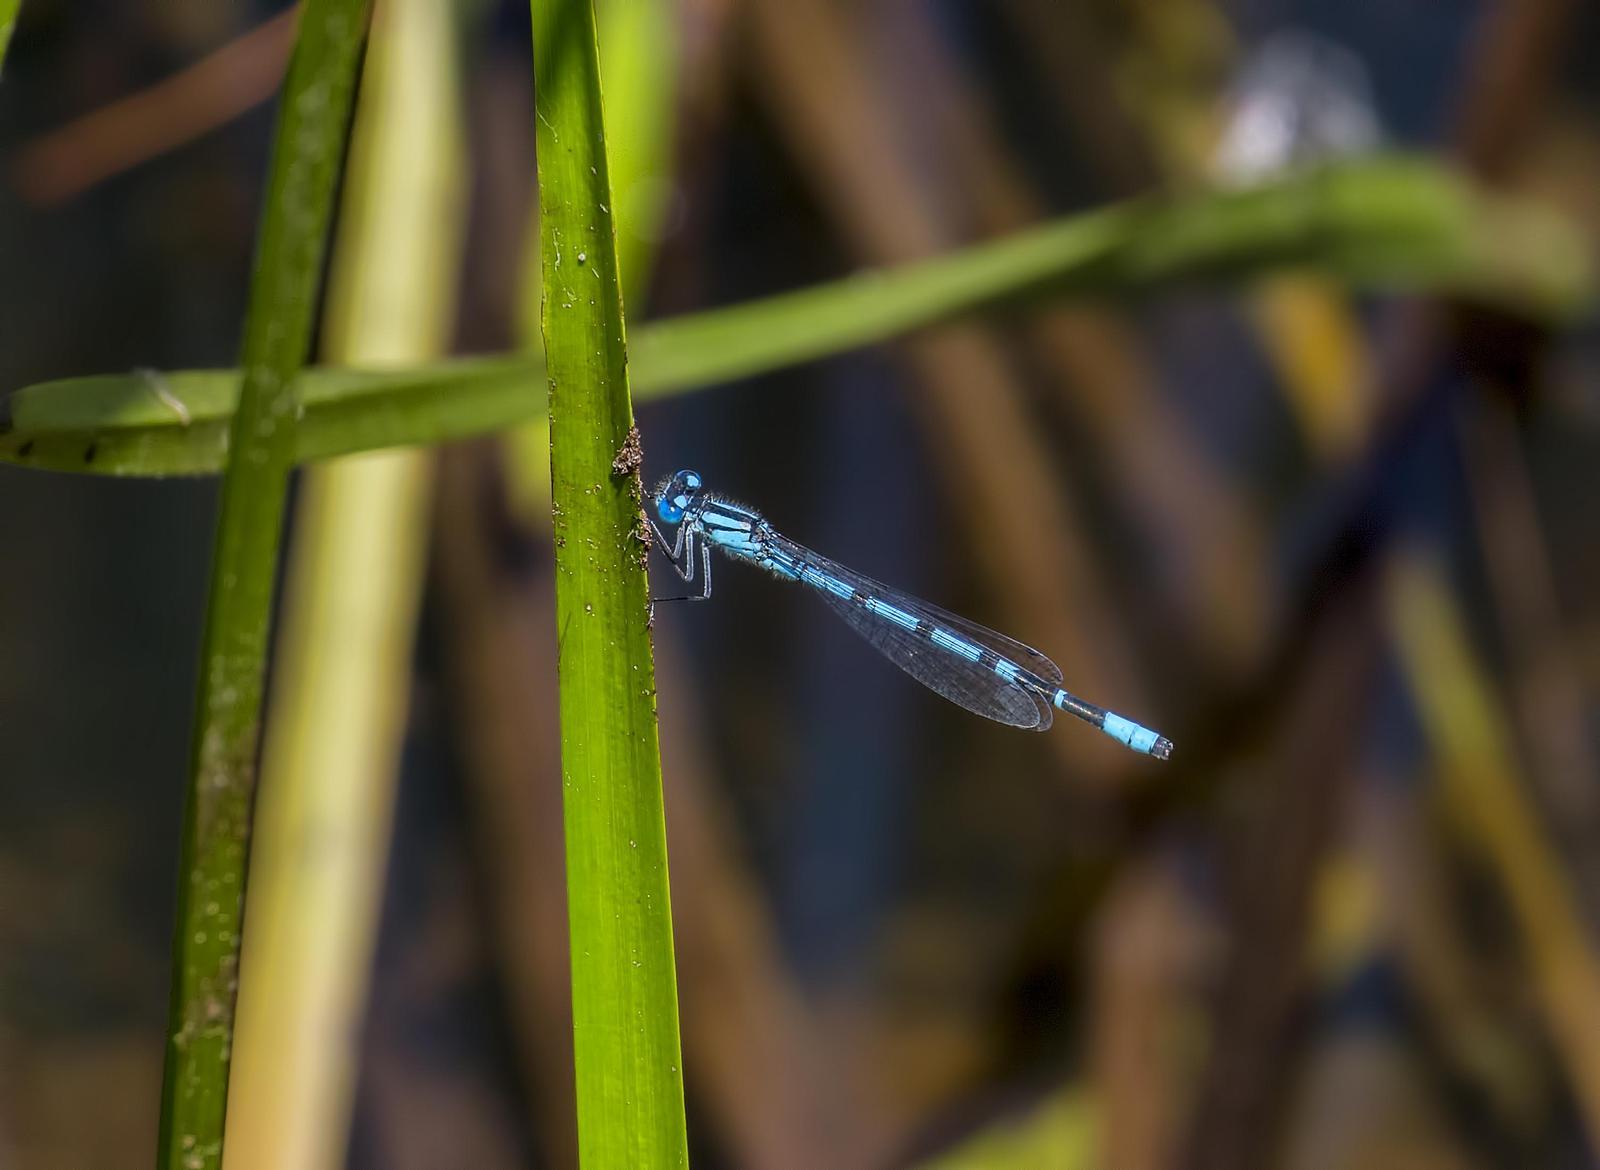 Northern Bluet Photo by Michael Moore